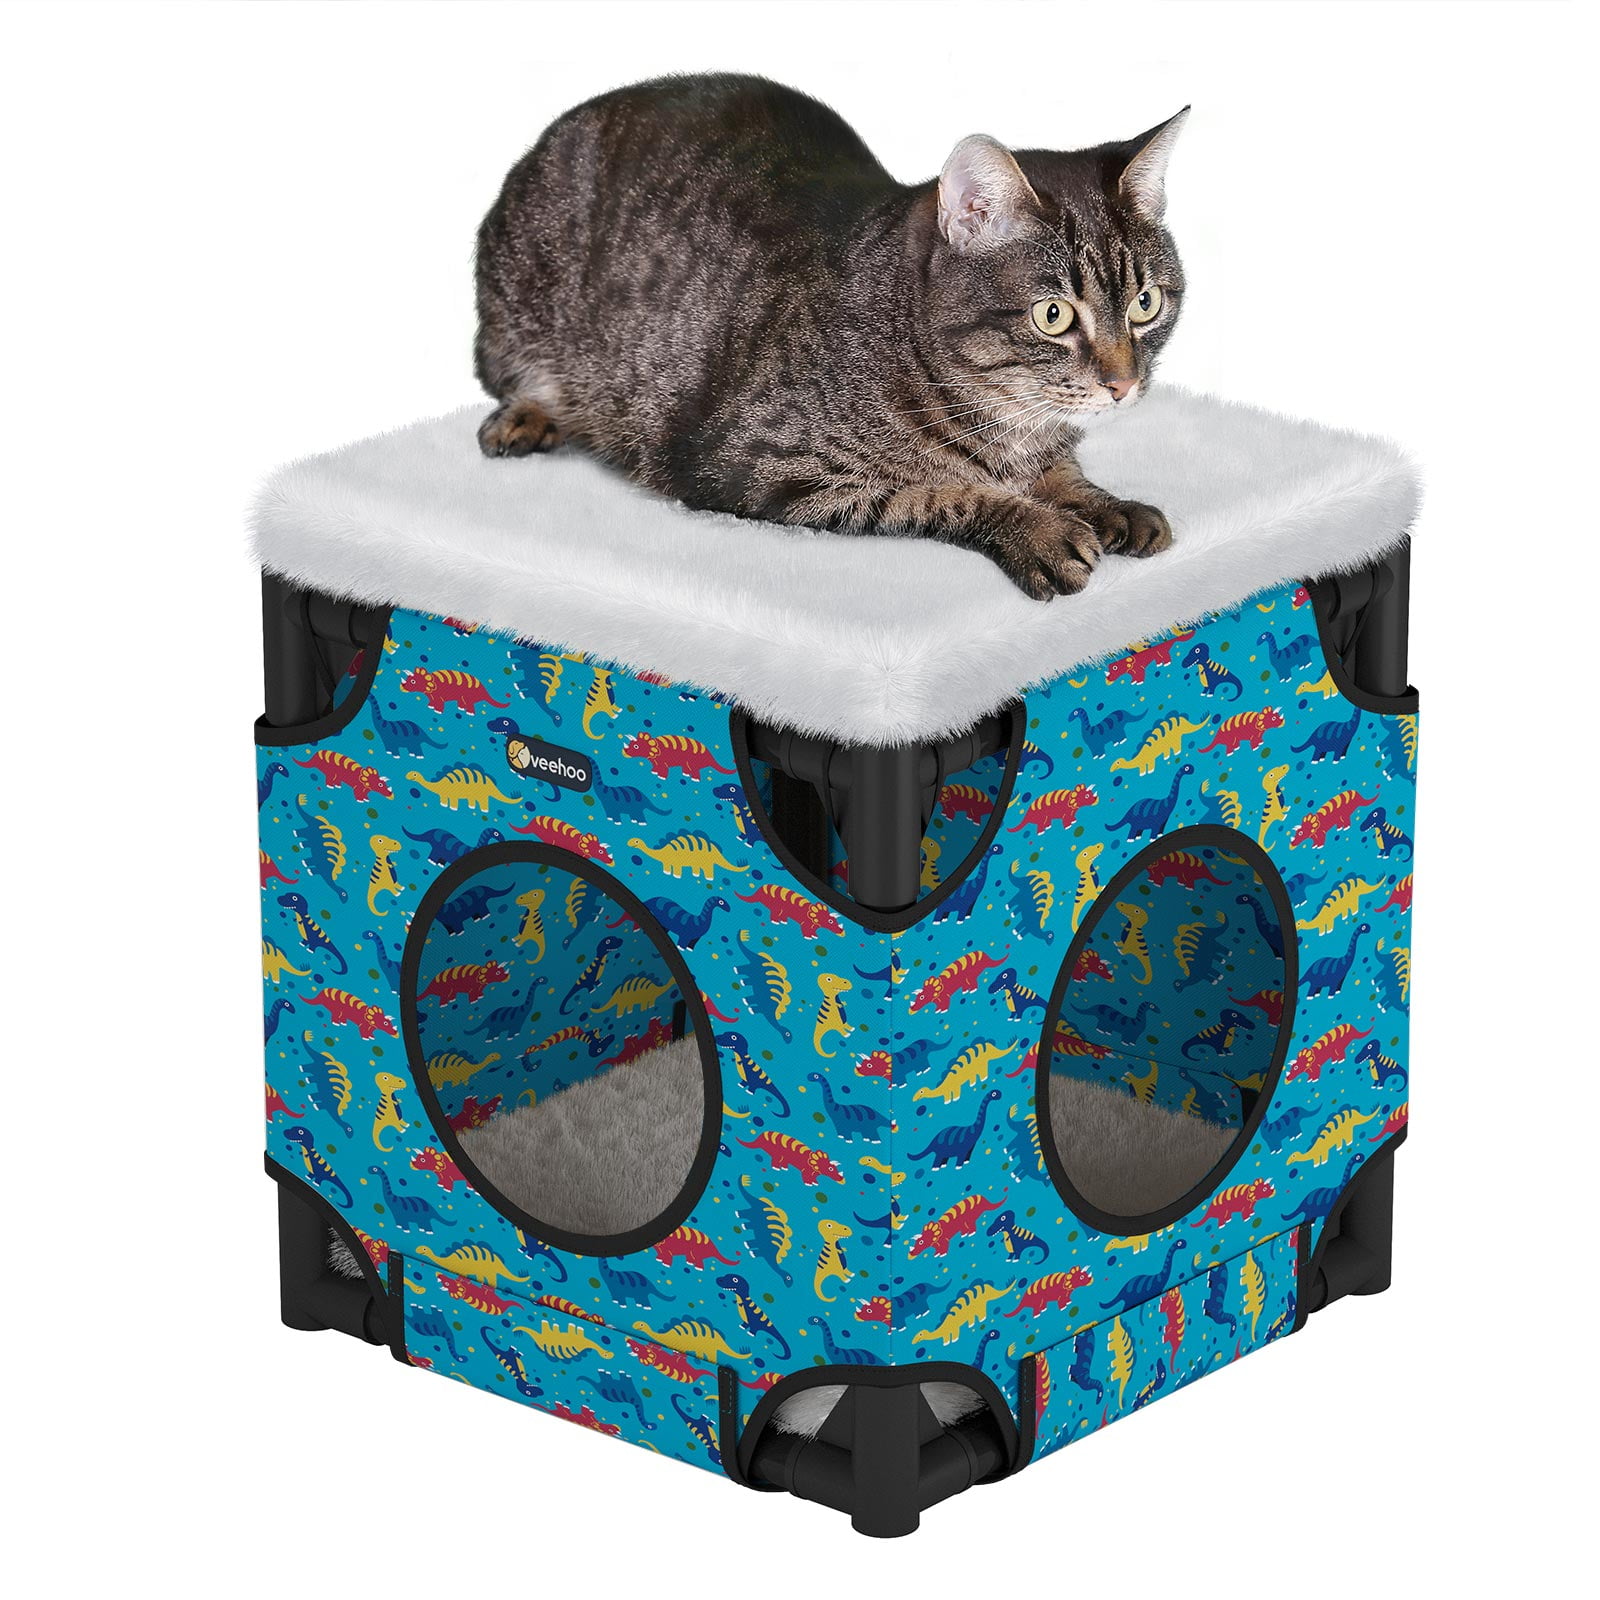 Kitty House for Indoor Cats Stackable Cat Condo with Removable Sleeping Pad Veehoo Cooling Cat Cube Bed Cat Cave with Waterproof Oxford Fabric & Stainless Steel 